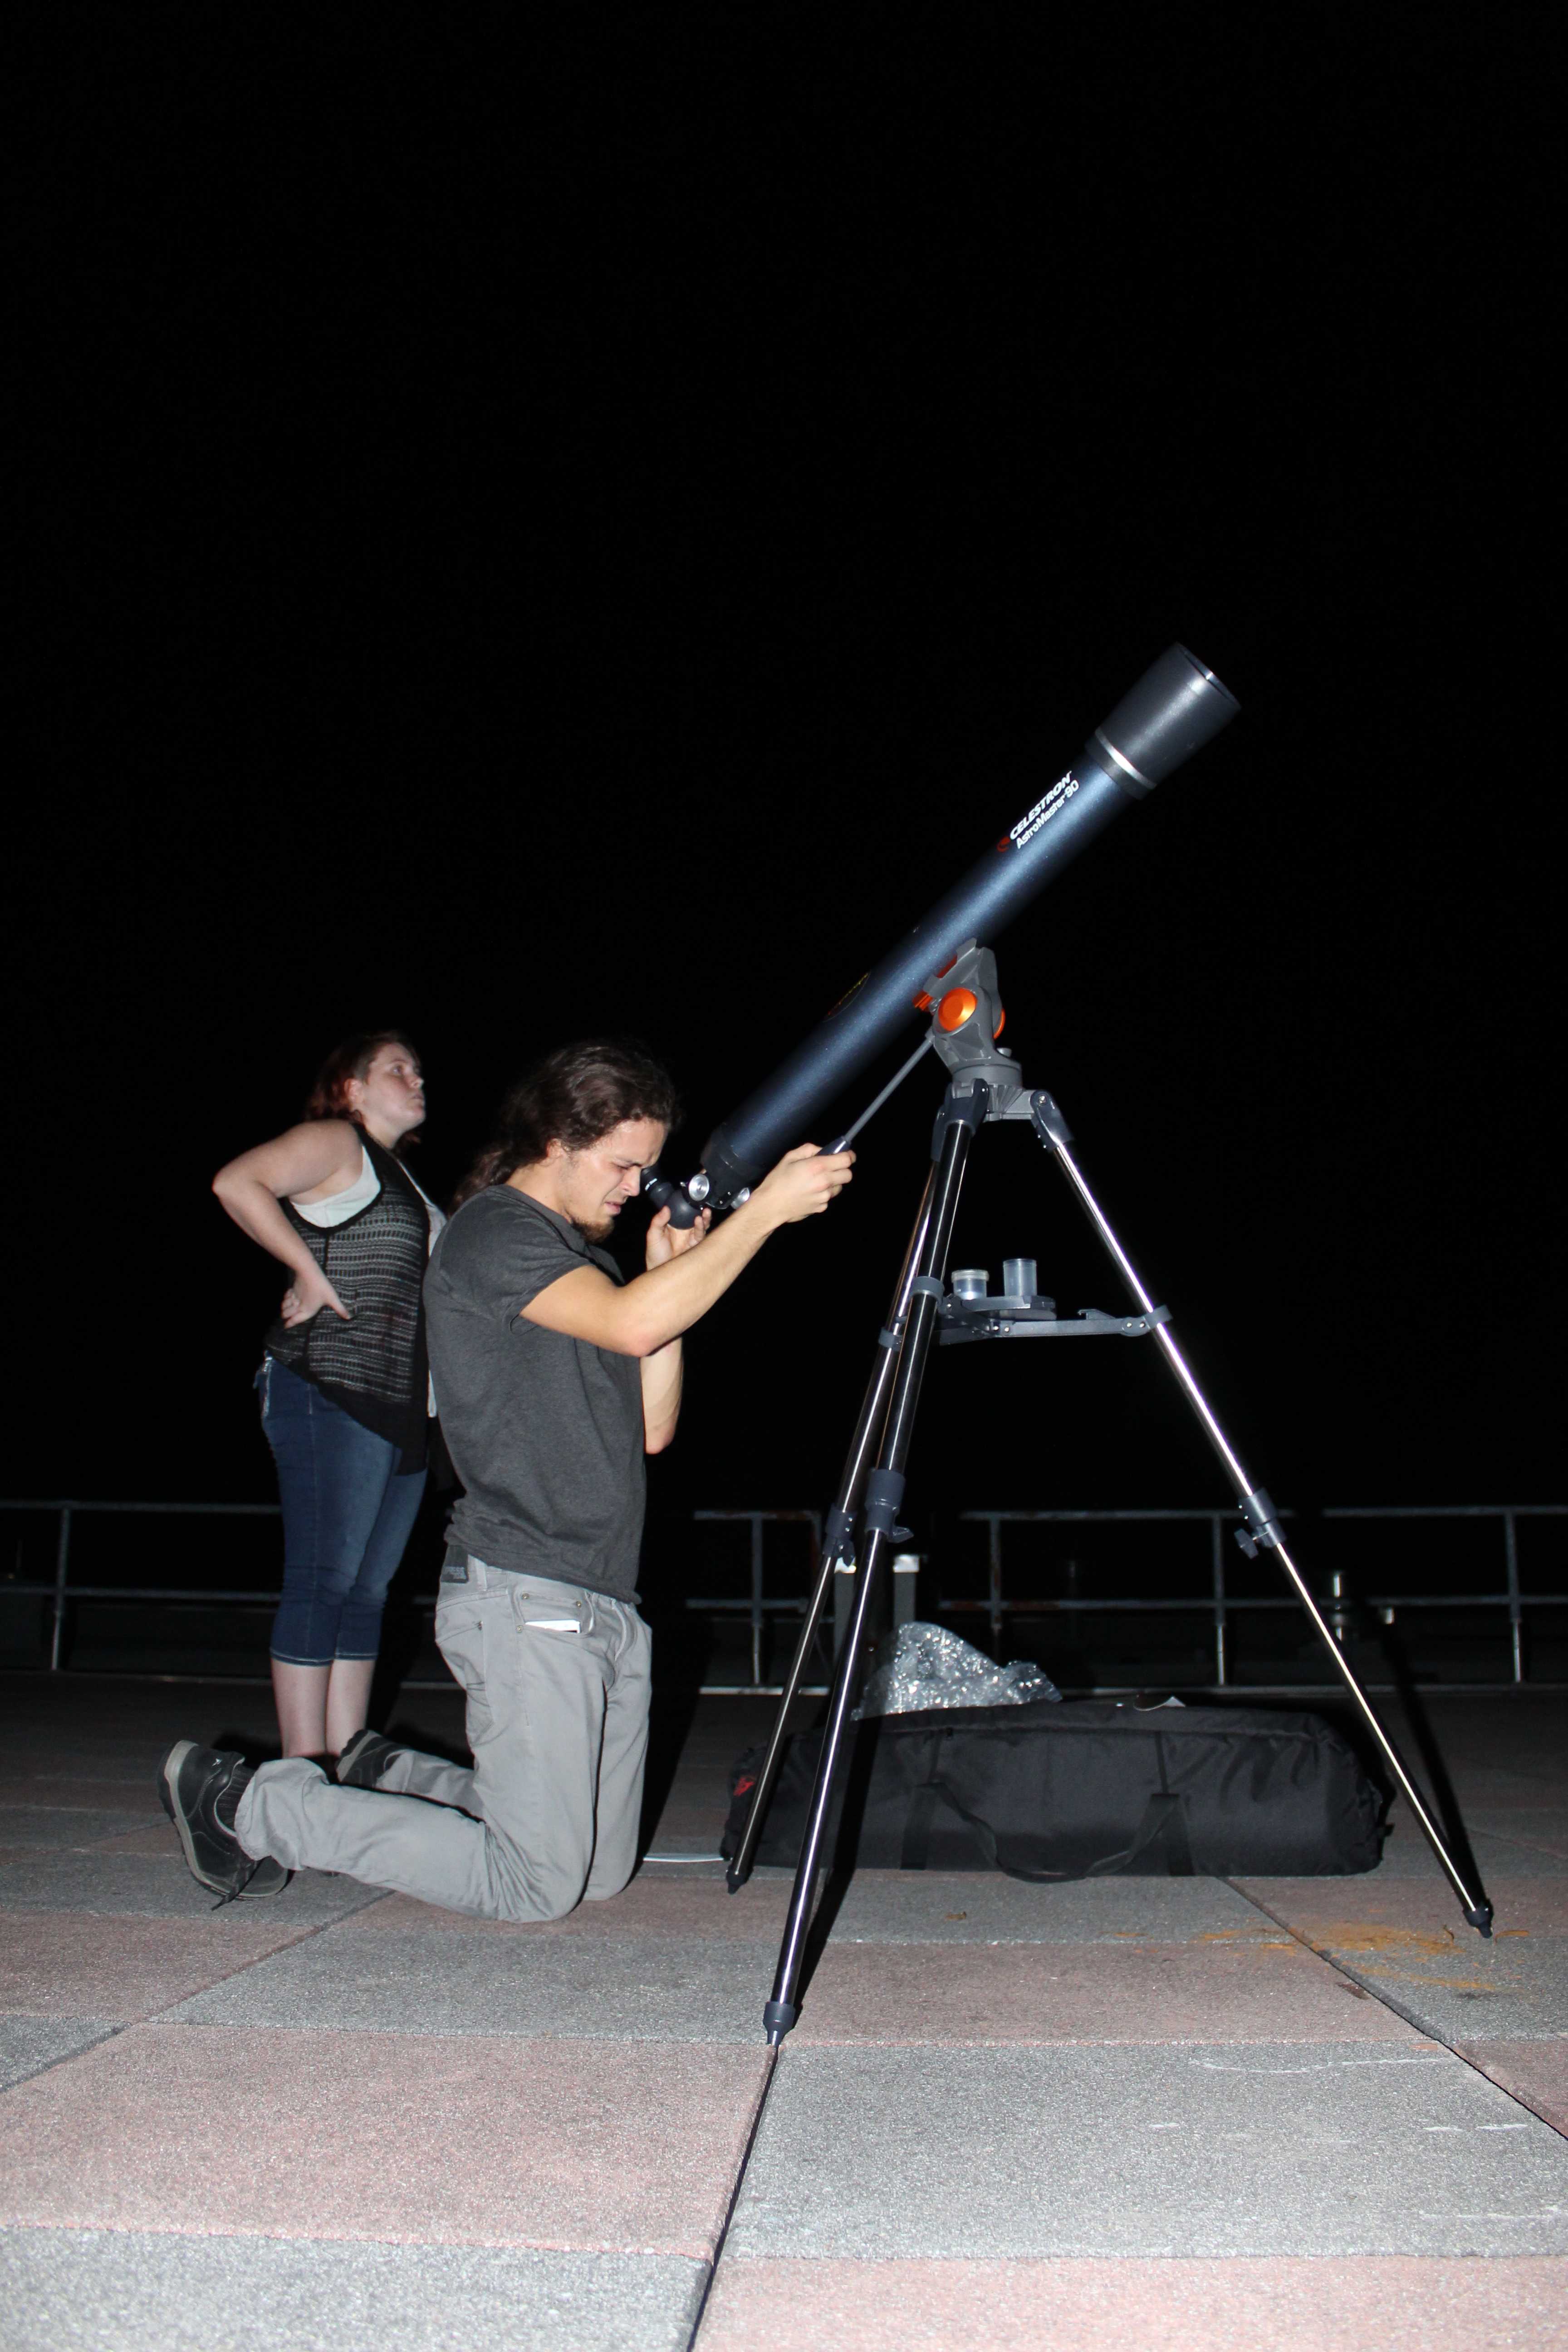 Astrophysics Professor Dr. Hewitt and Junior Astrophysics Student Shannon Silverman set up the main telescope for attendees to view nearby planets and stars. Photo by Ashley Pace